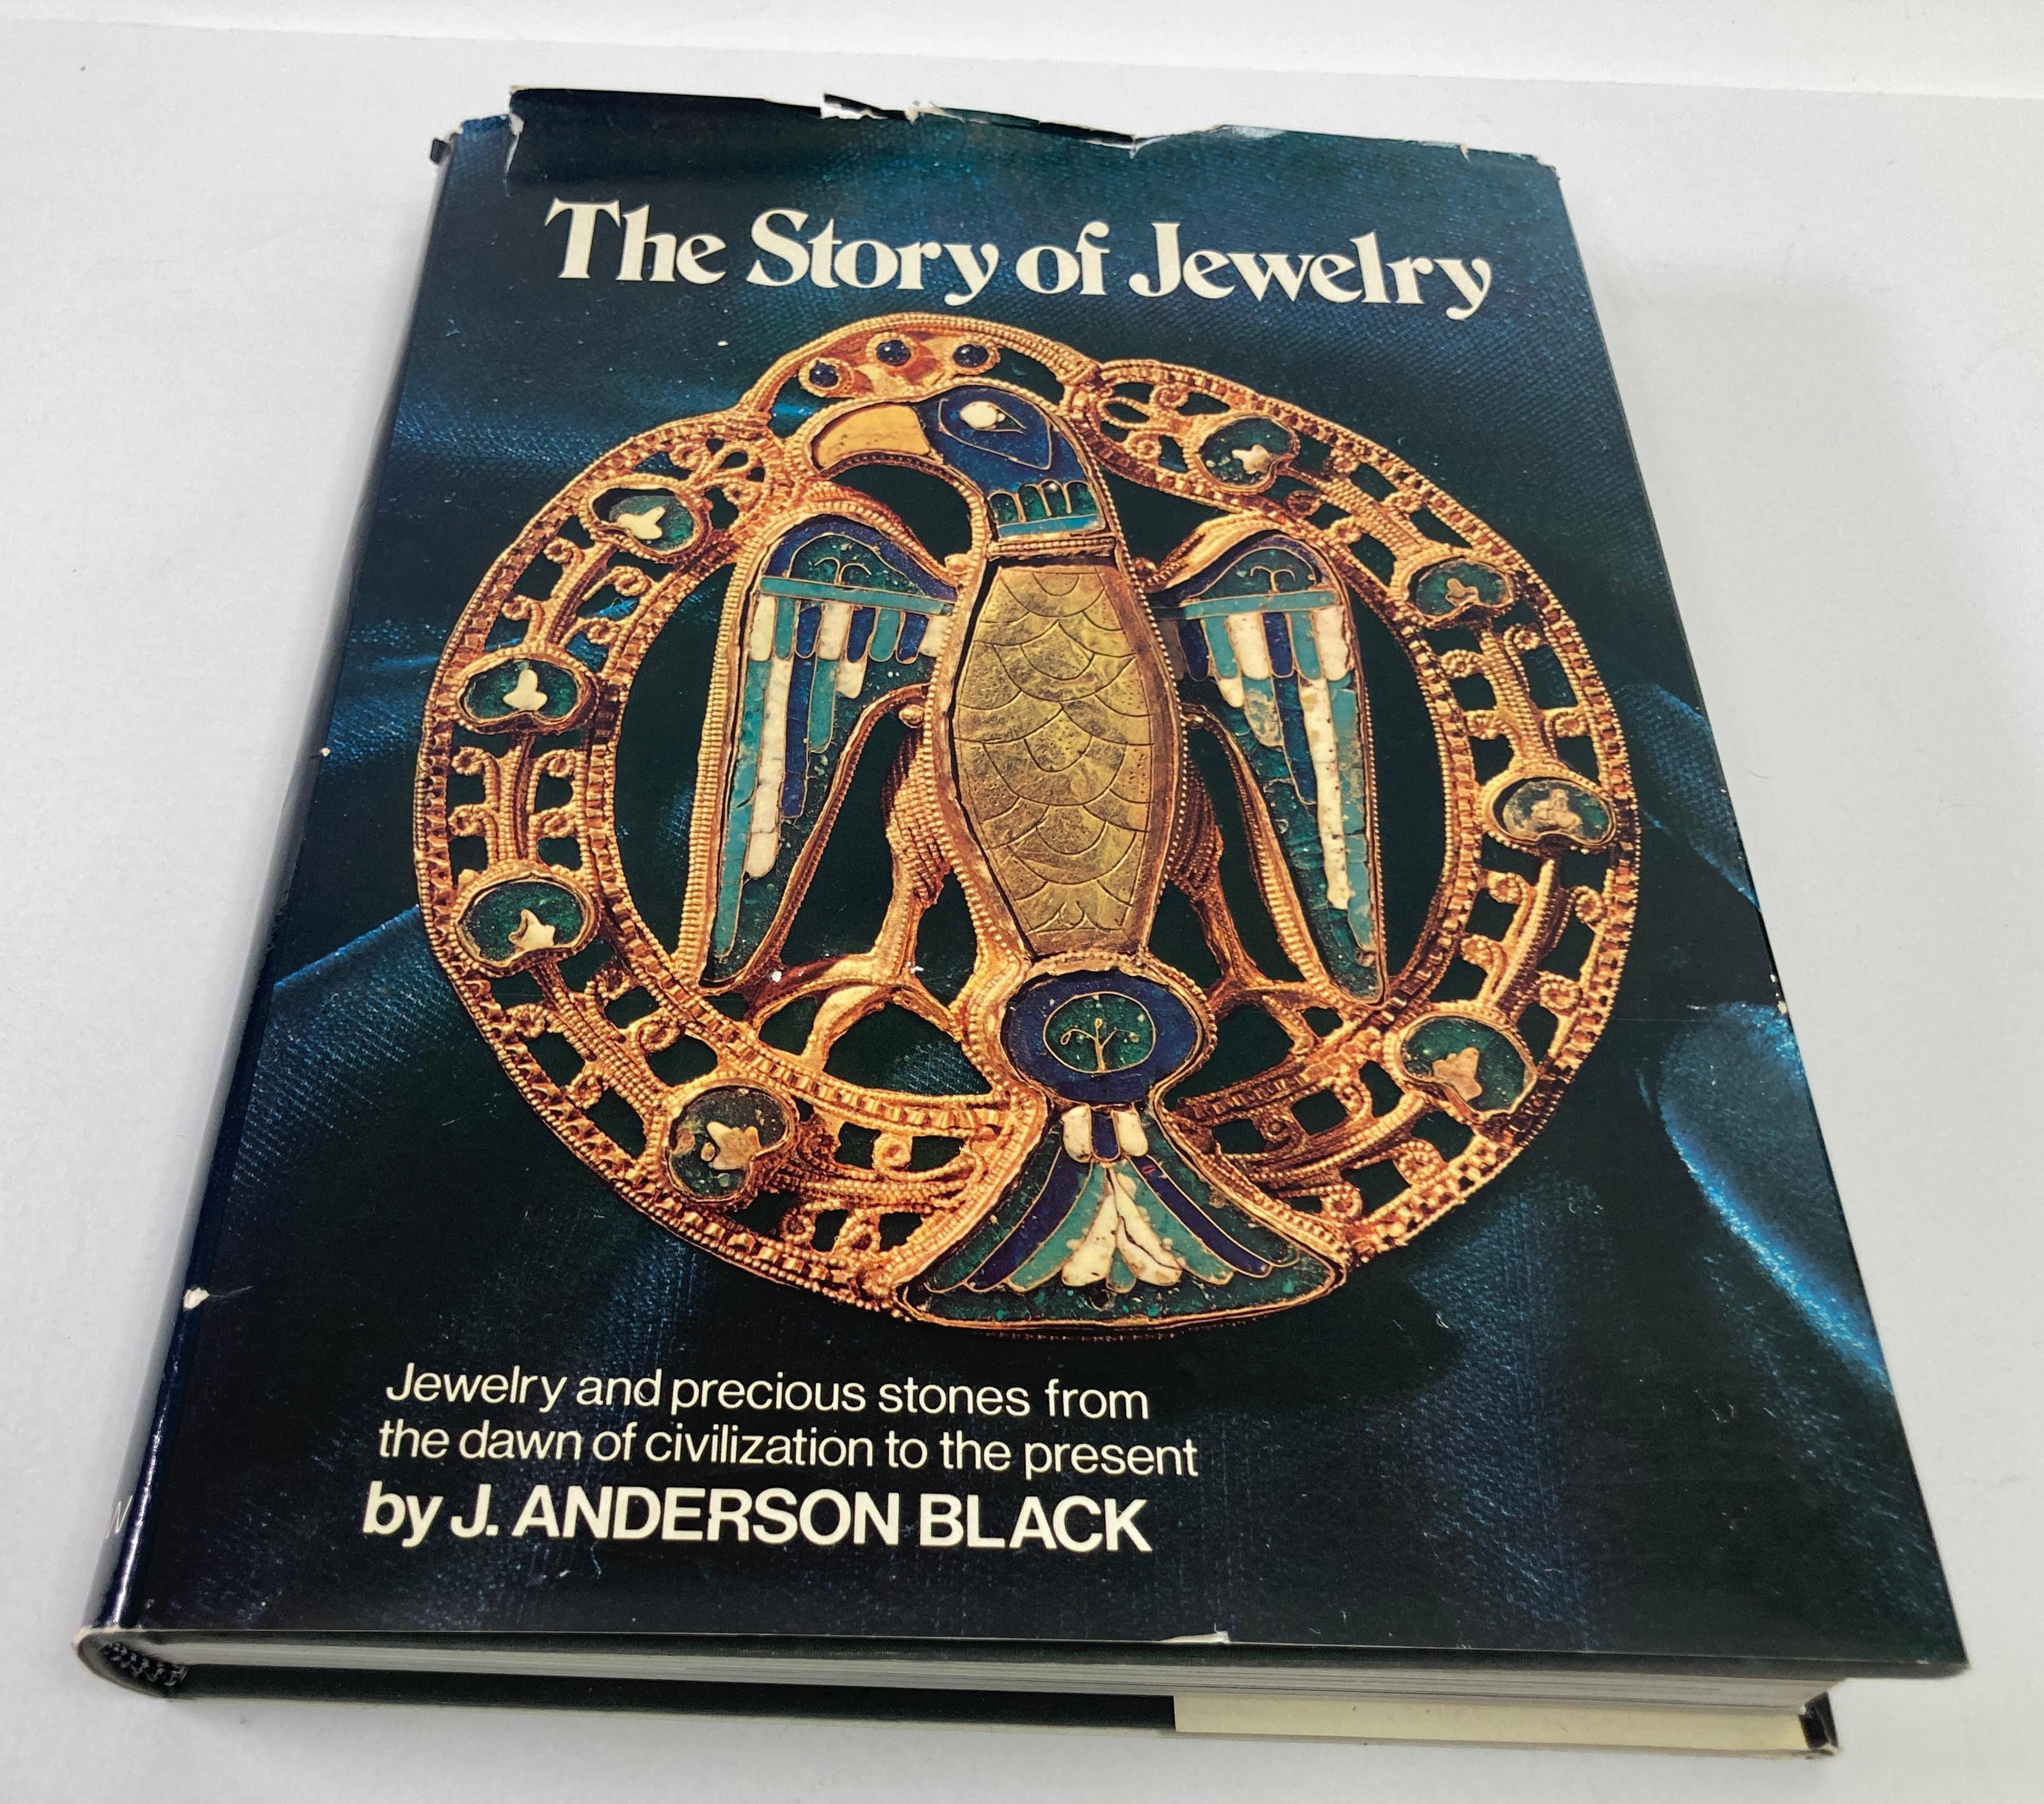 The Story of Jewelry 1973 by J. Anderson. Introduction by Edward Lucie-Smith Black Hardcover Book.
Translate from Italian. J. Anderson Black - Storia dei gioielli
English text.
Documents jewelry's history from the primitive ornaments of prehistoric